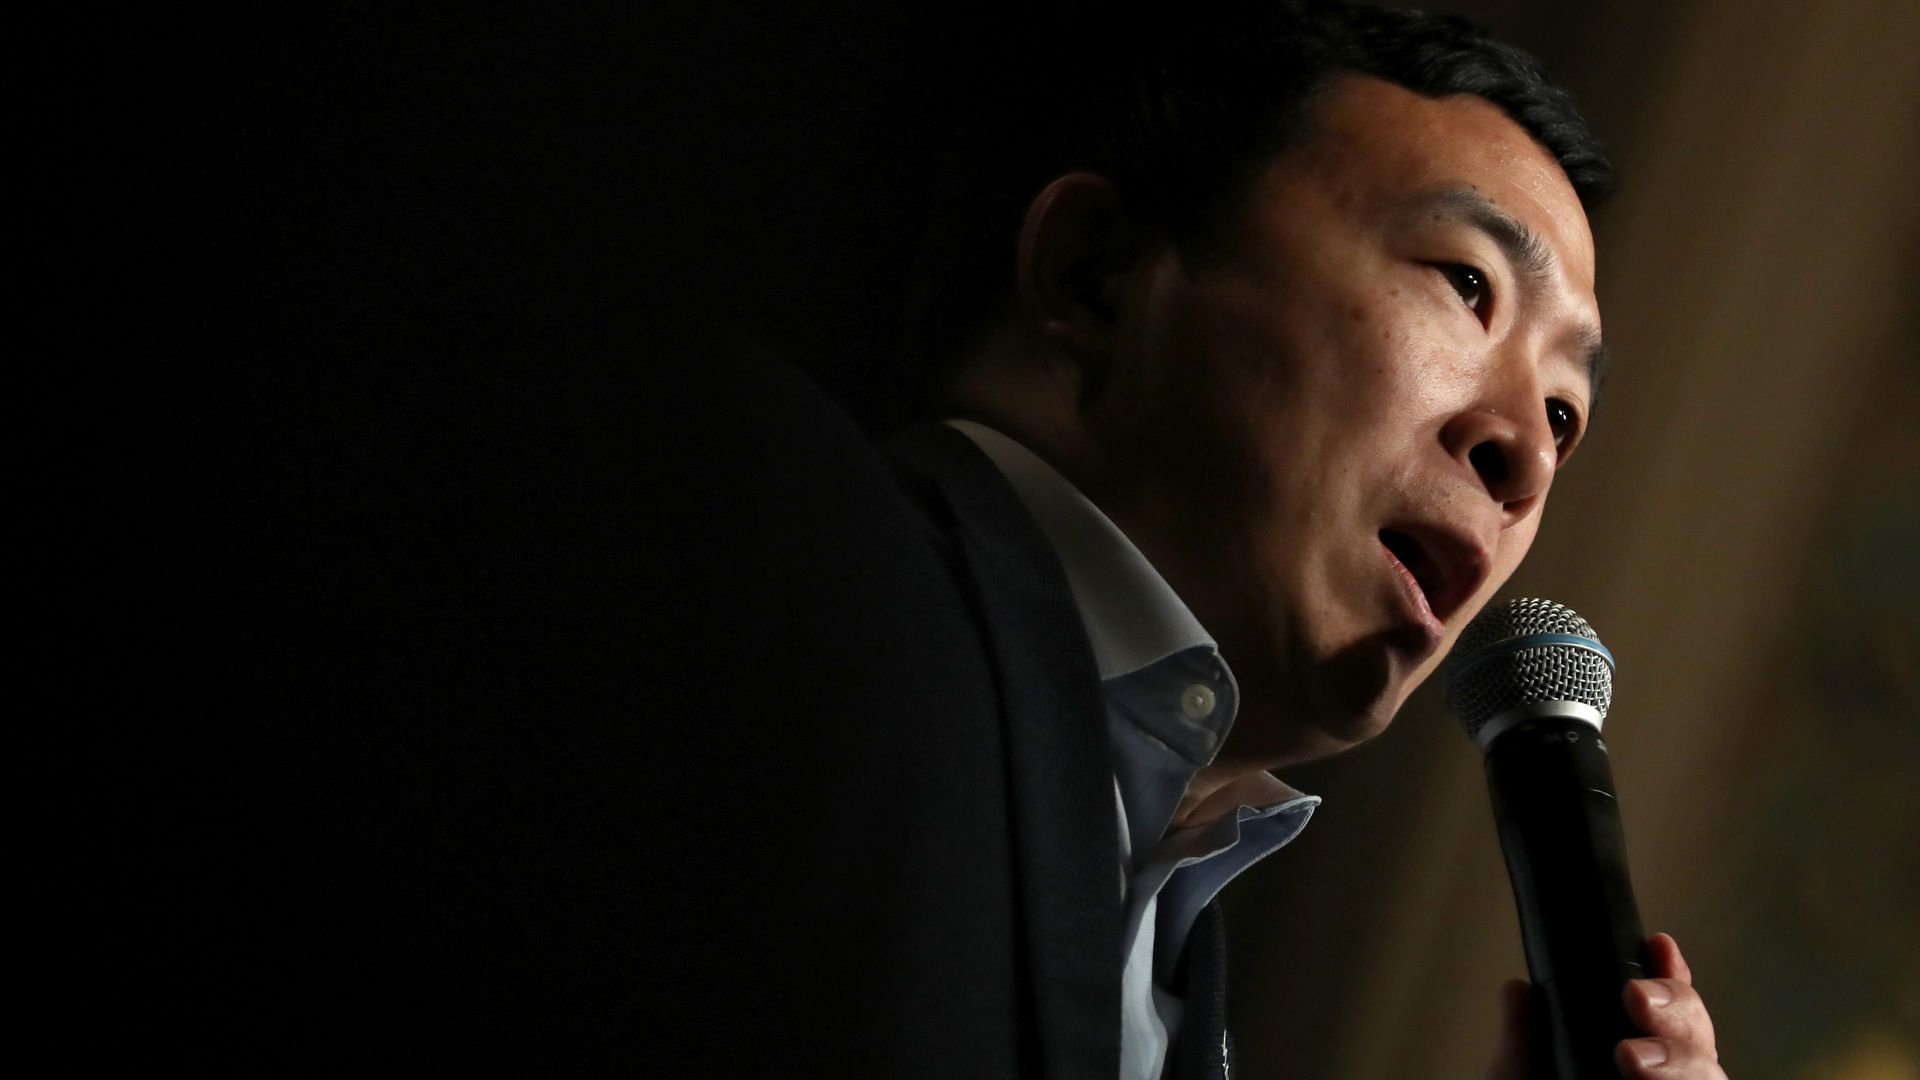 This image shows Andrew Yang holding a microphone.